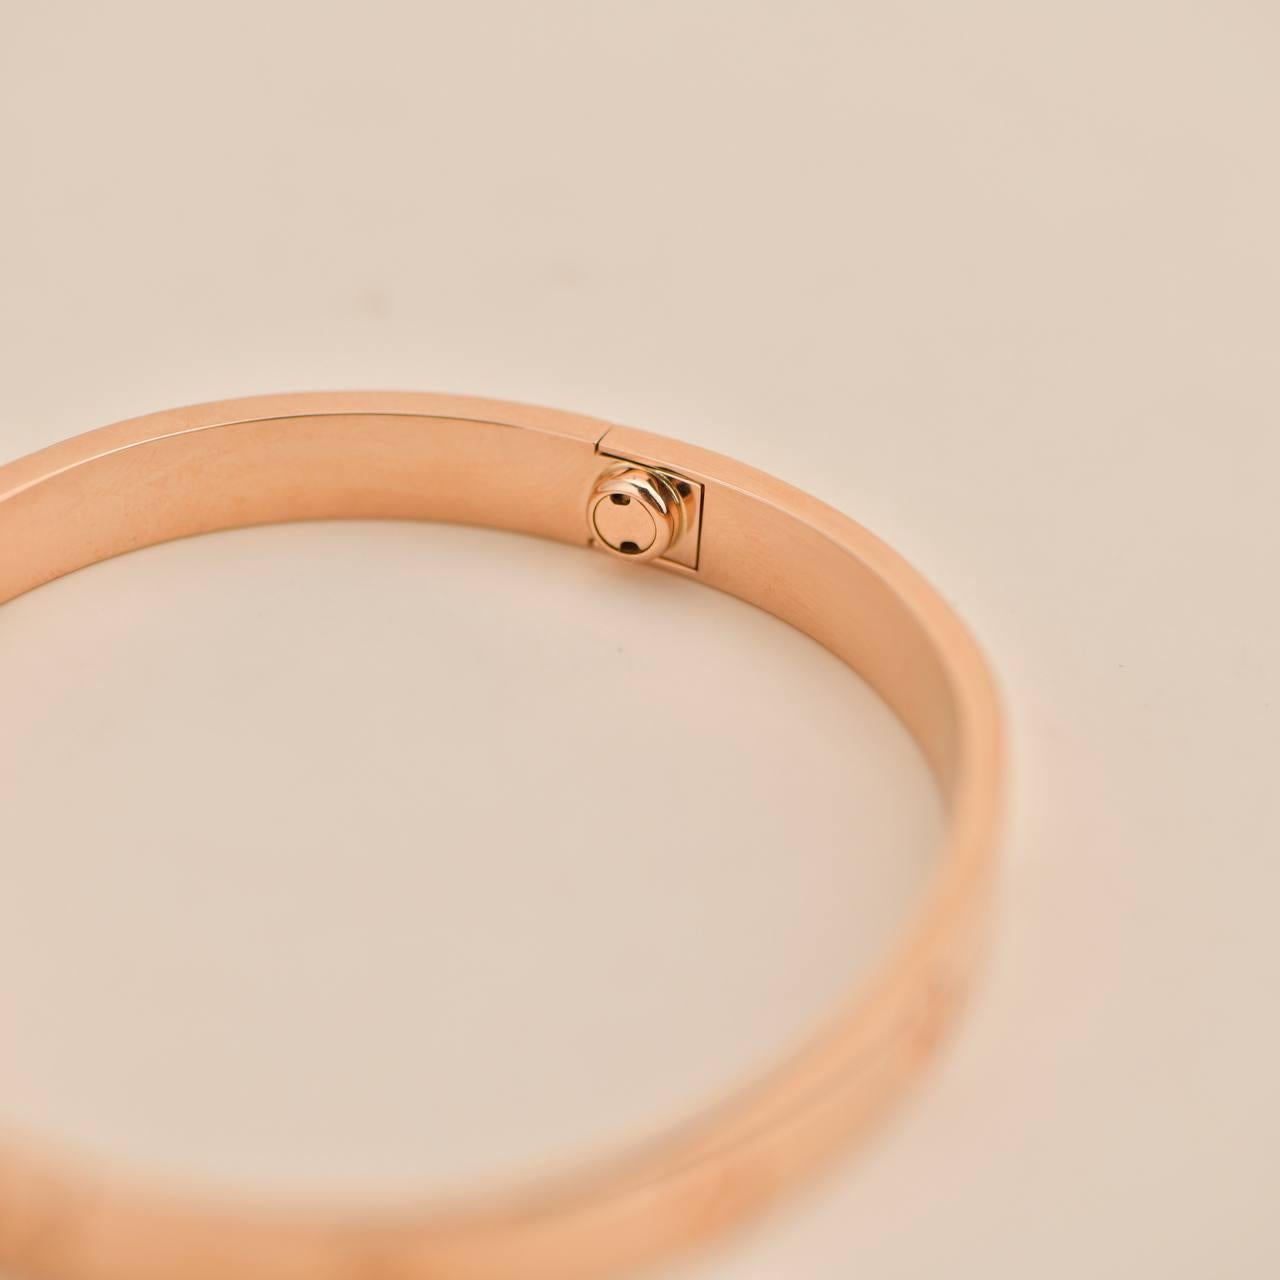 Cartier Love Bracelet 18k Rose Gold Size 18 In Excellent Condition For Sale In Banbury, GB